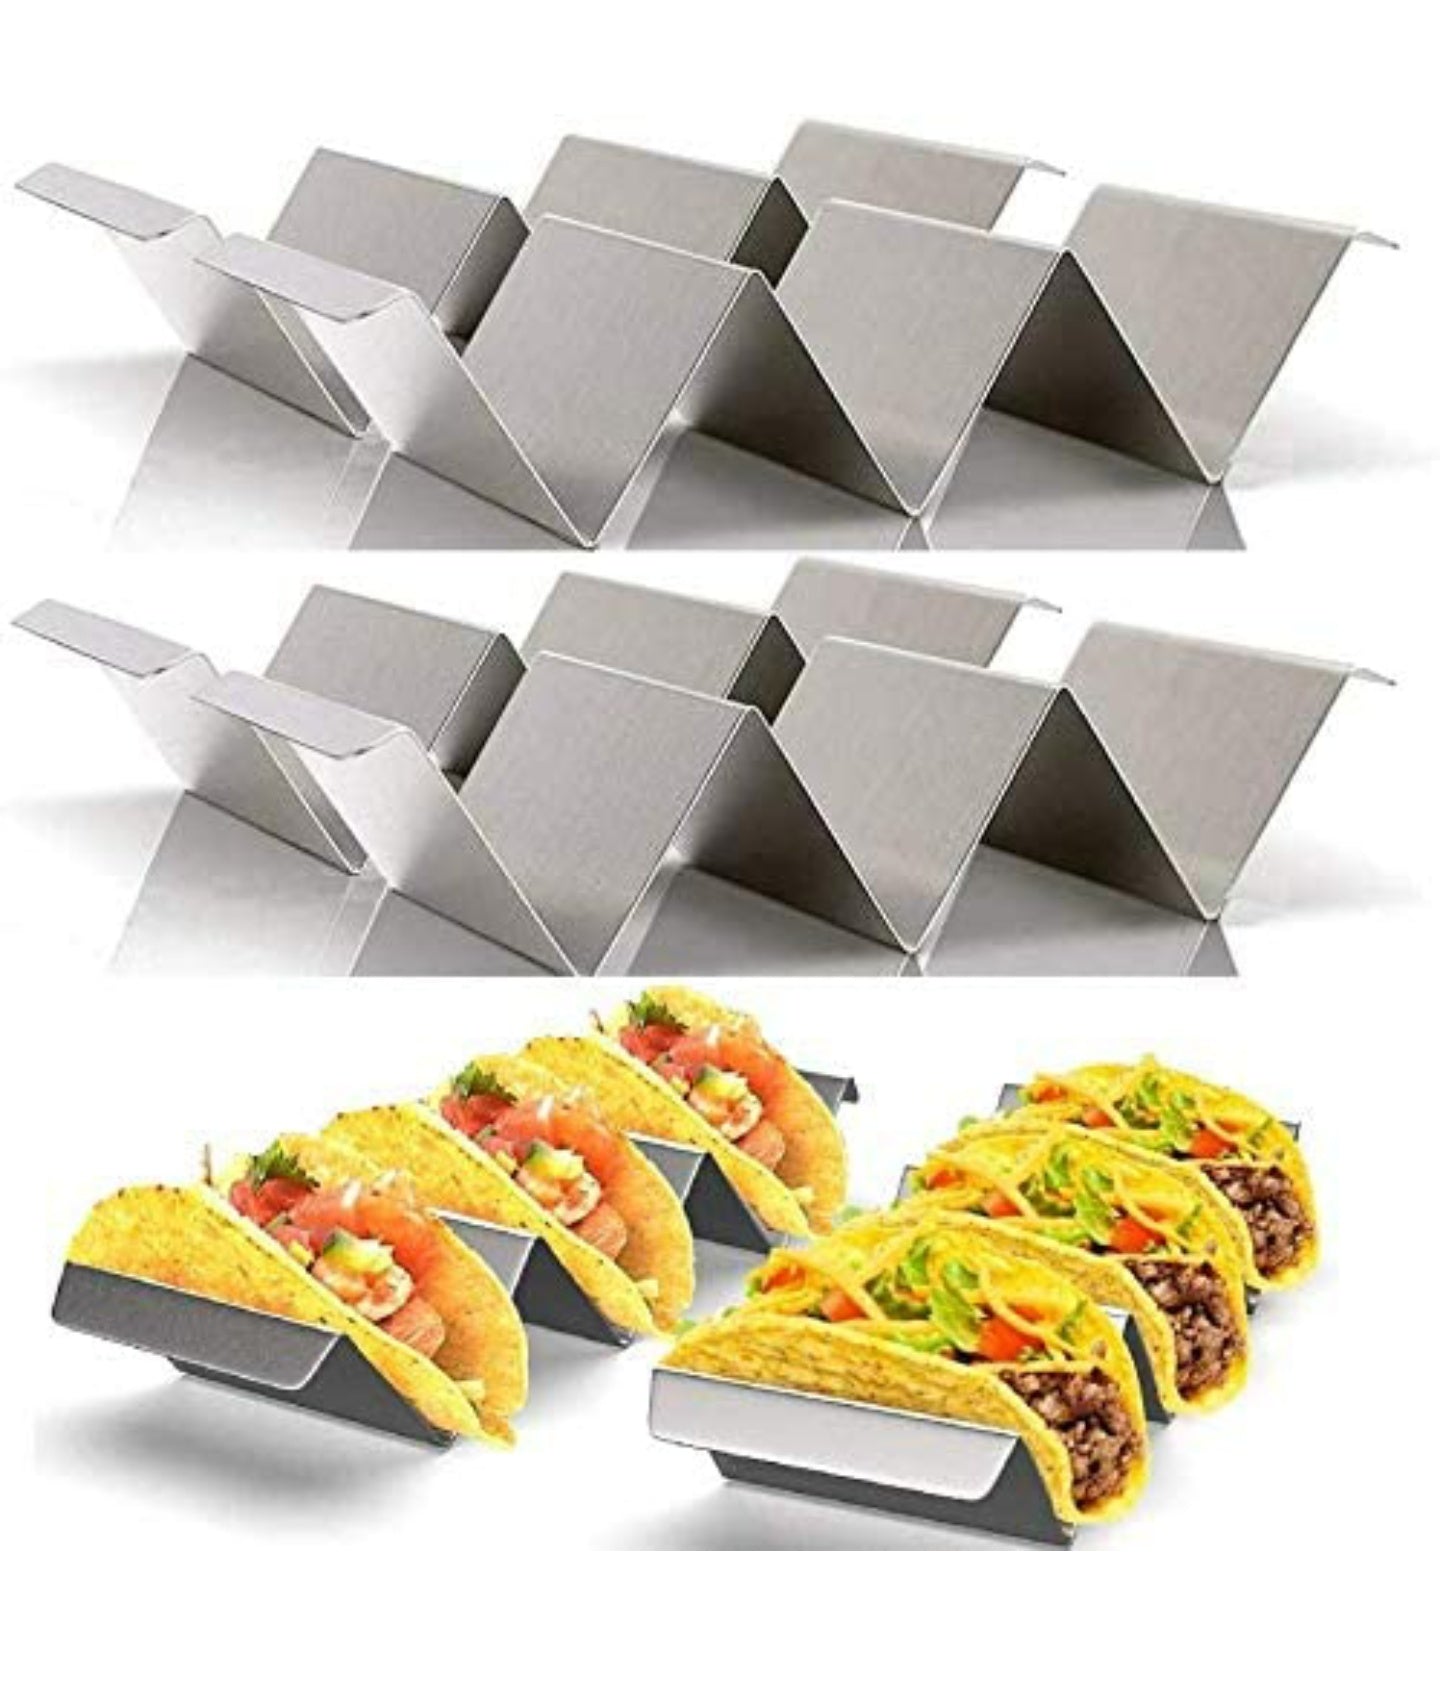 Taco Holder - Holds 2-3 tacos - stainless steel